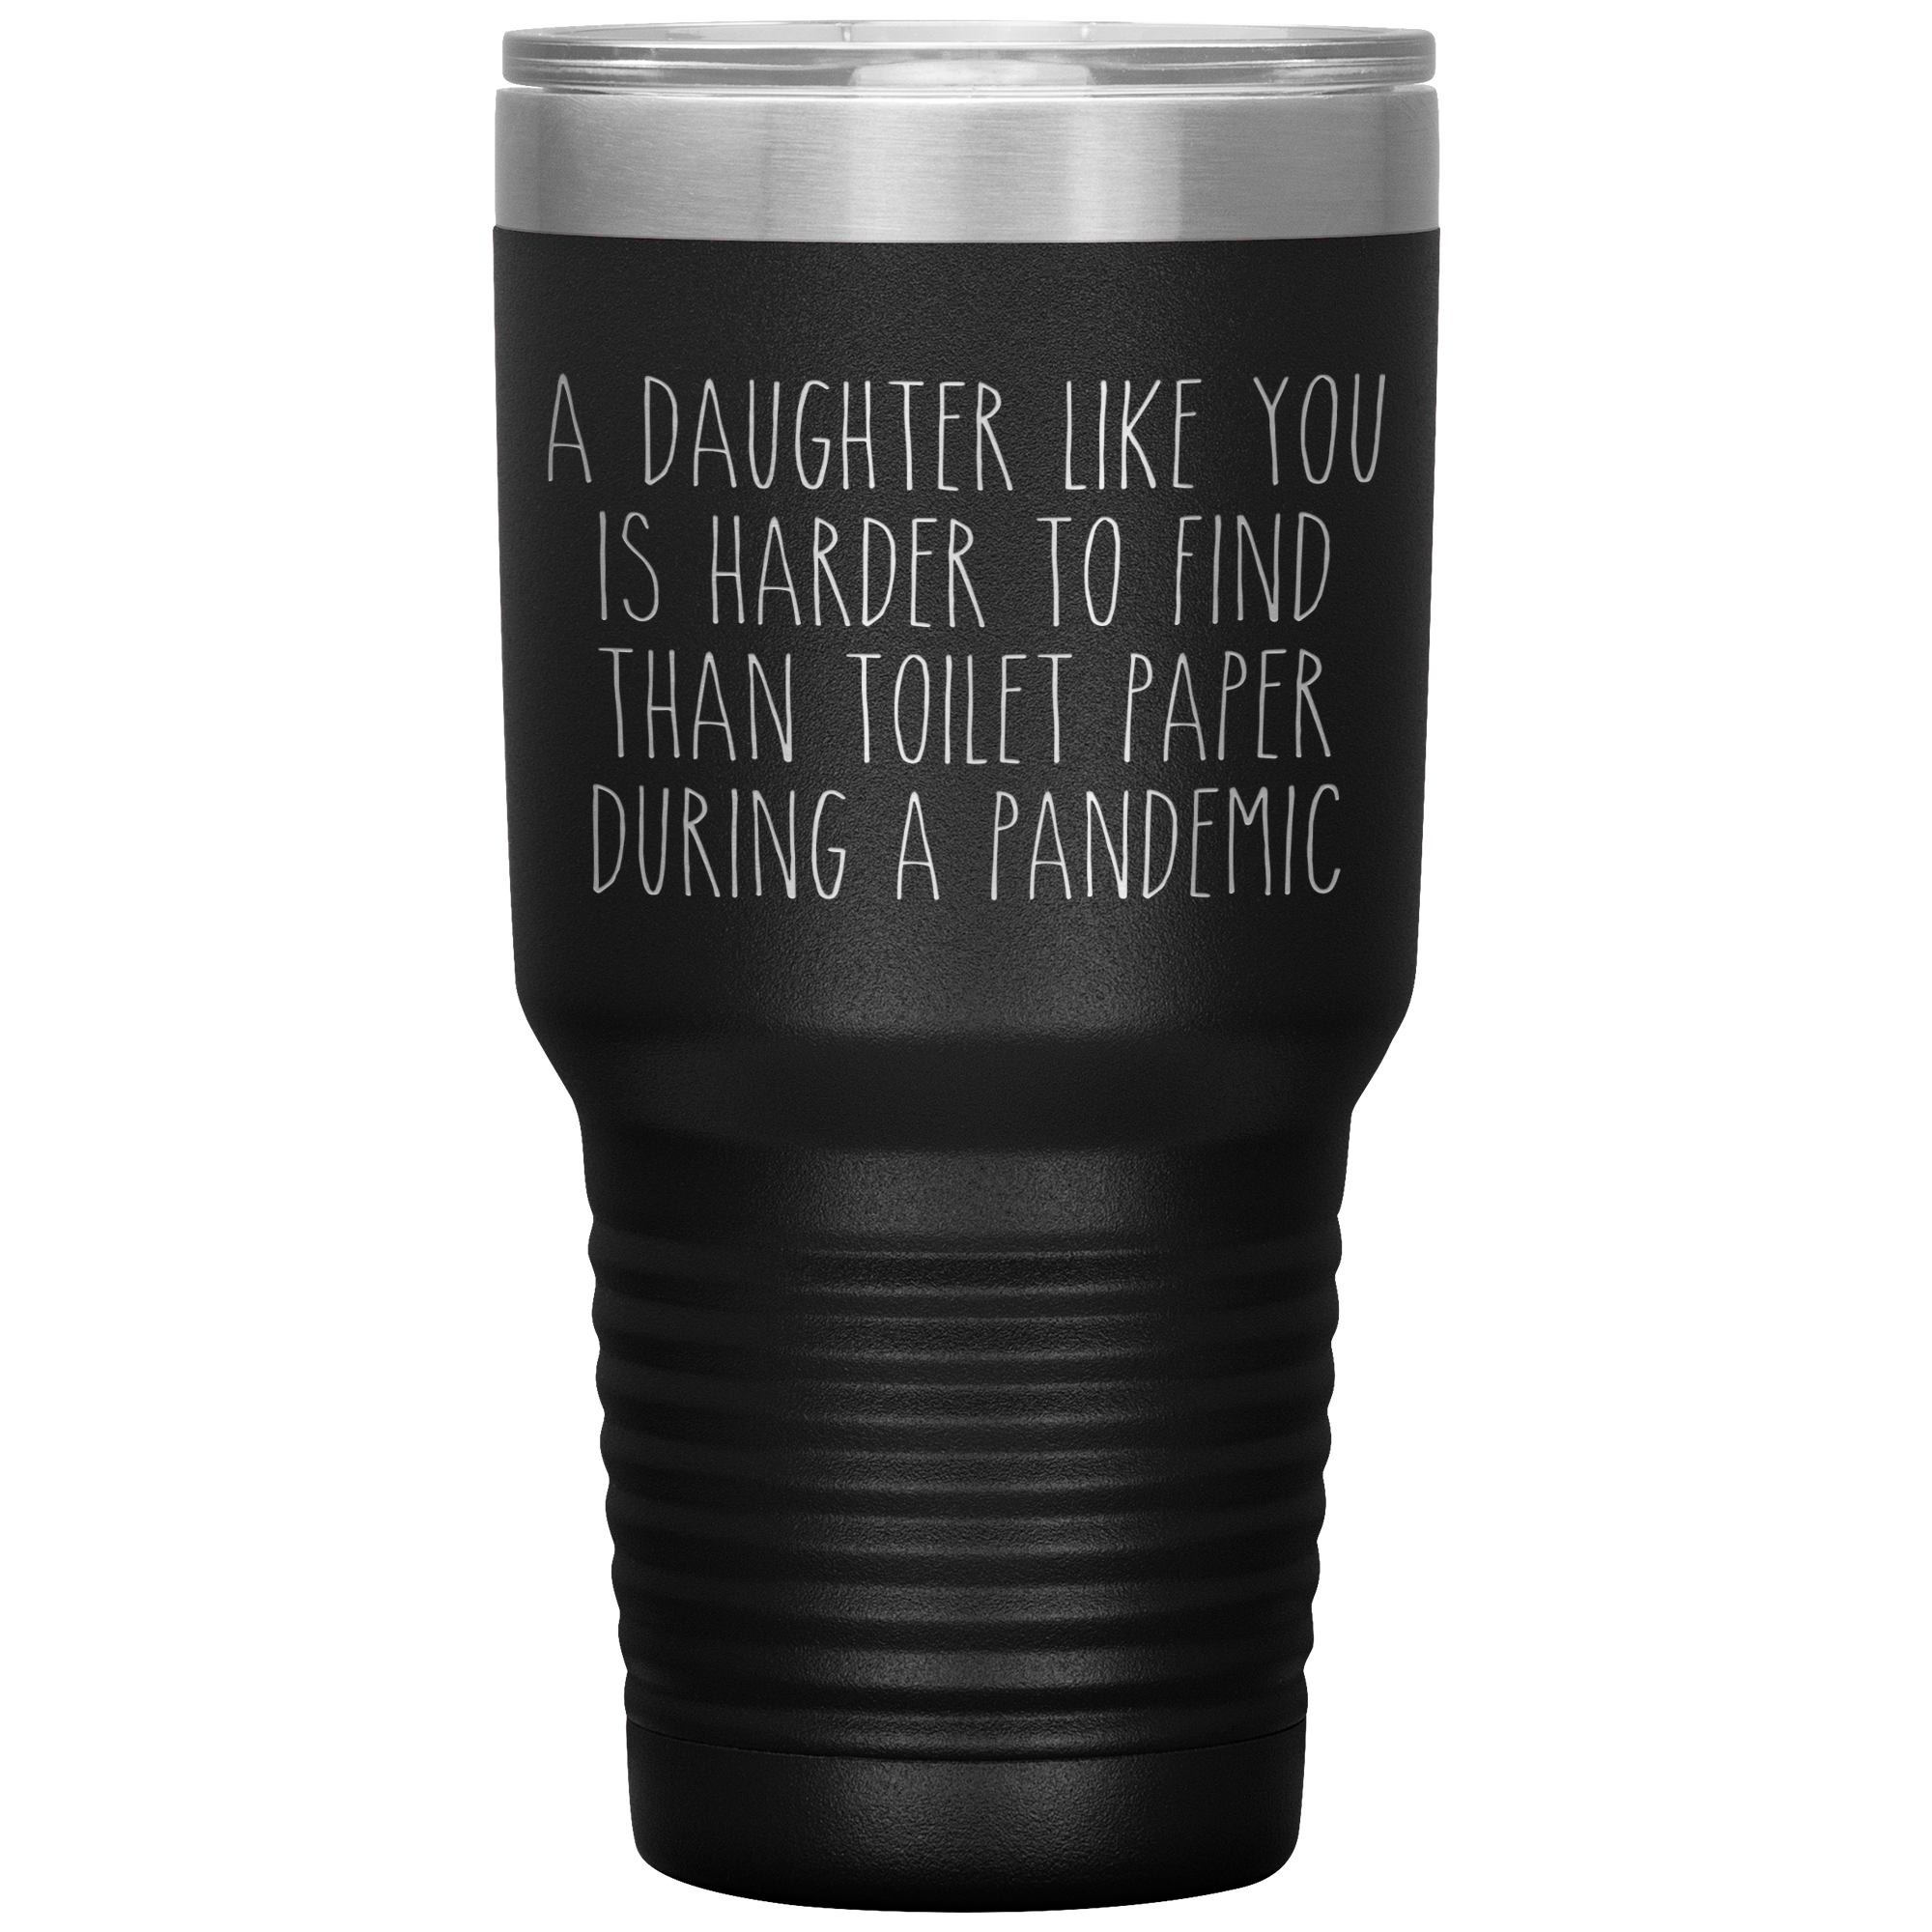 A Daughter Like You is Harder to Find Than Toilet Paper During a Pandemic Tumbler Mug Travel Coffee Cup 30oz BPA Free